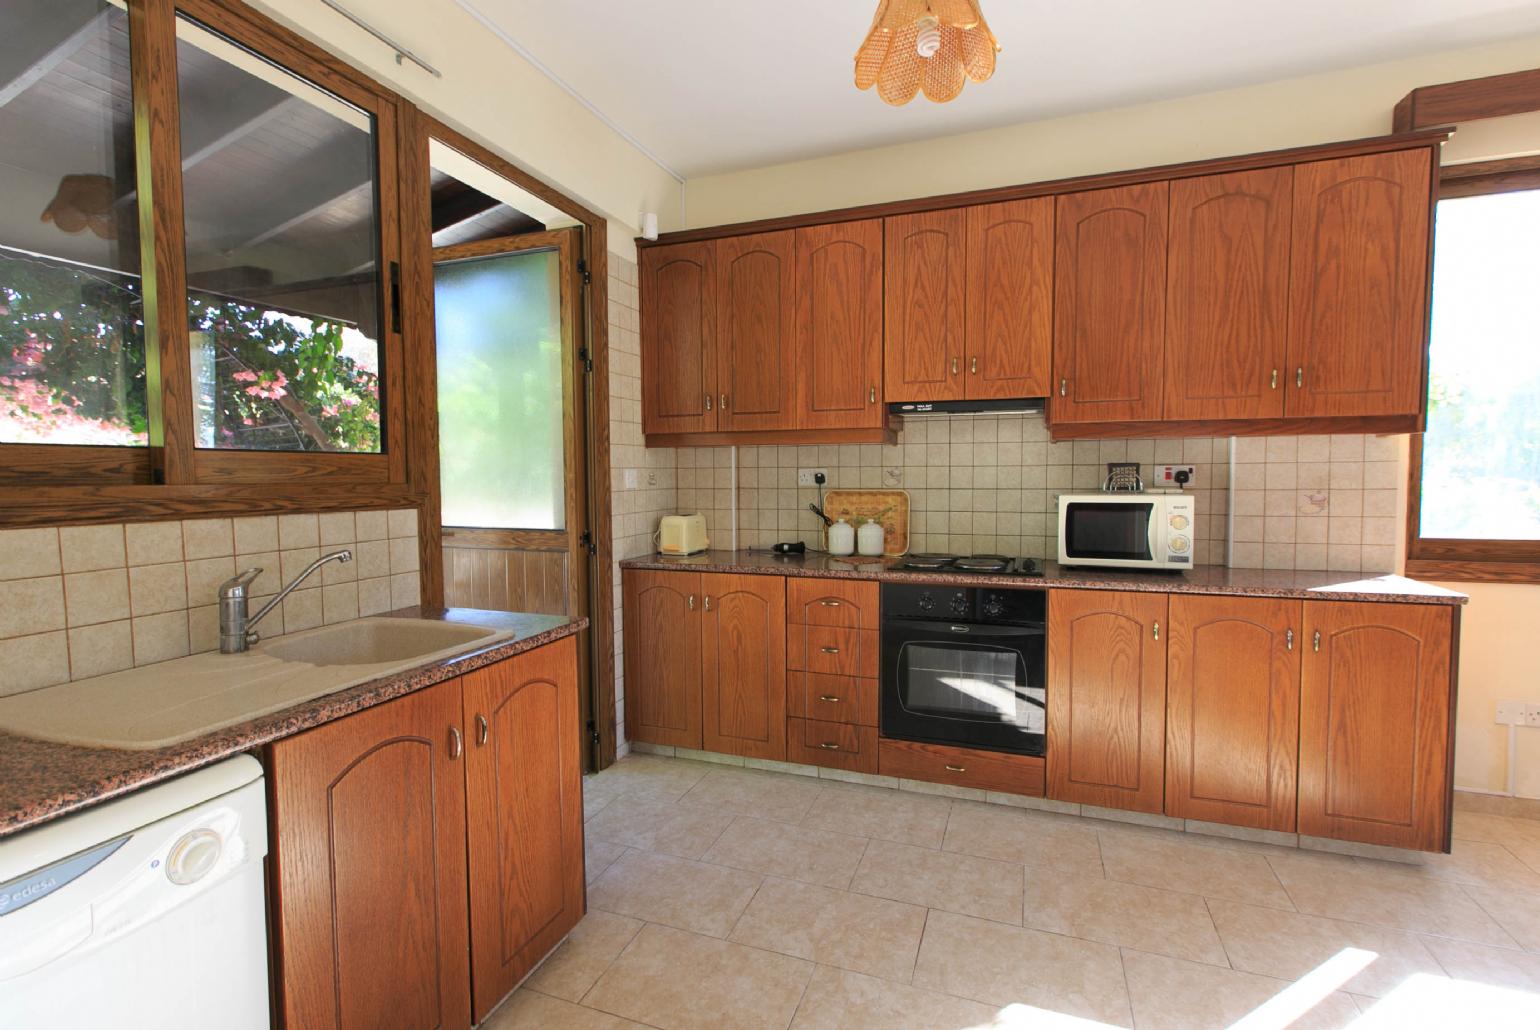 Equipped kitchen, dining area and terrace access